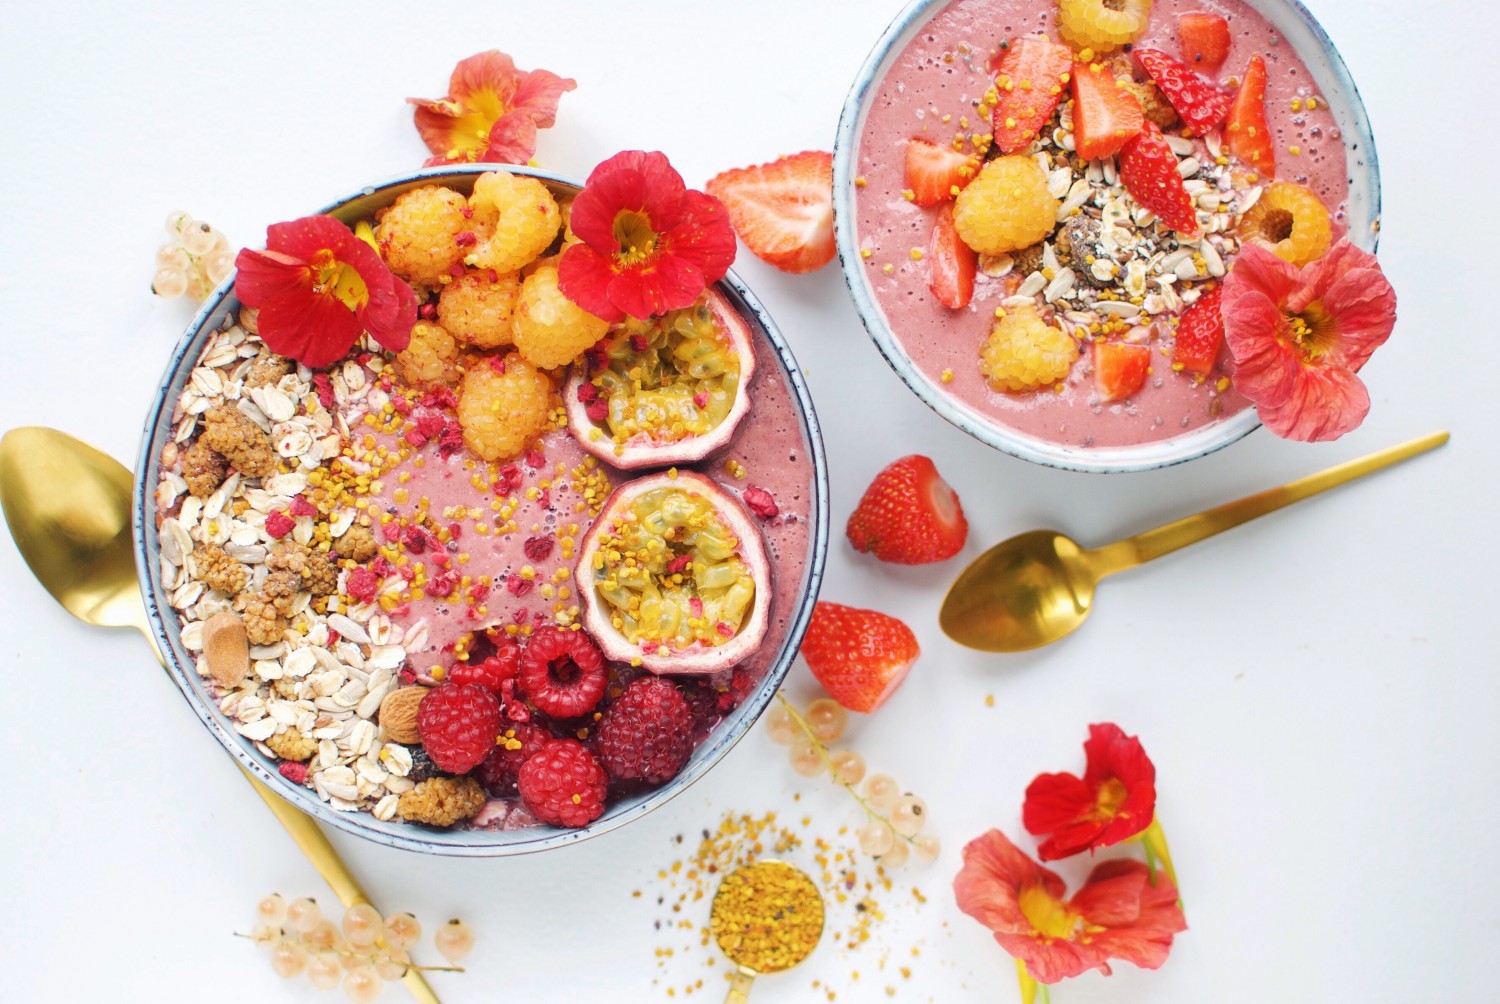 Raspberry smoothie bowls with ginger and zucchini